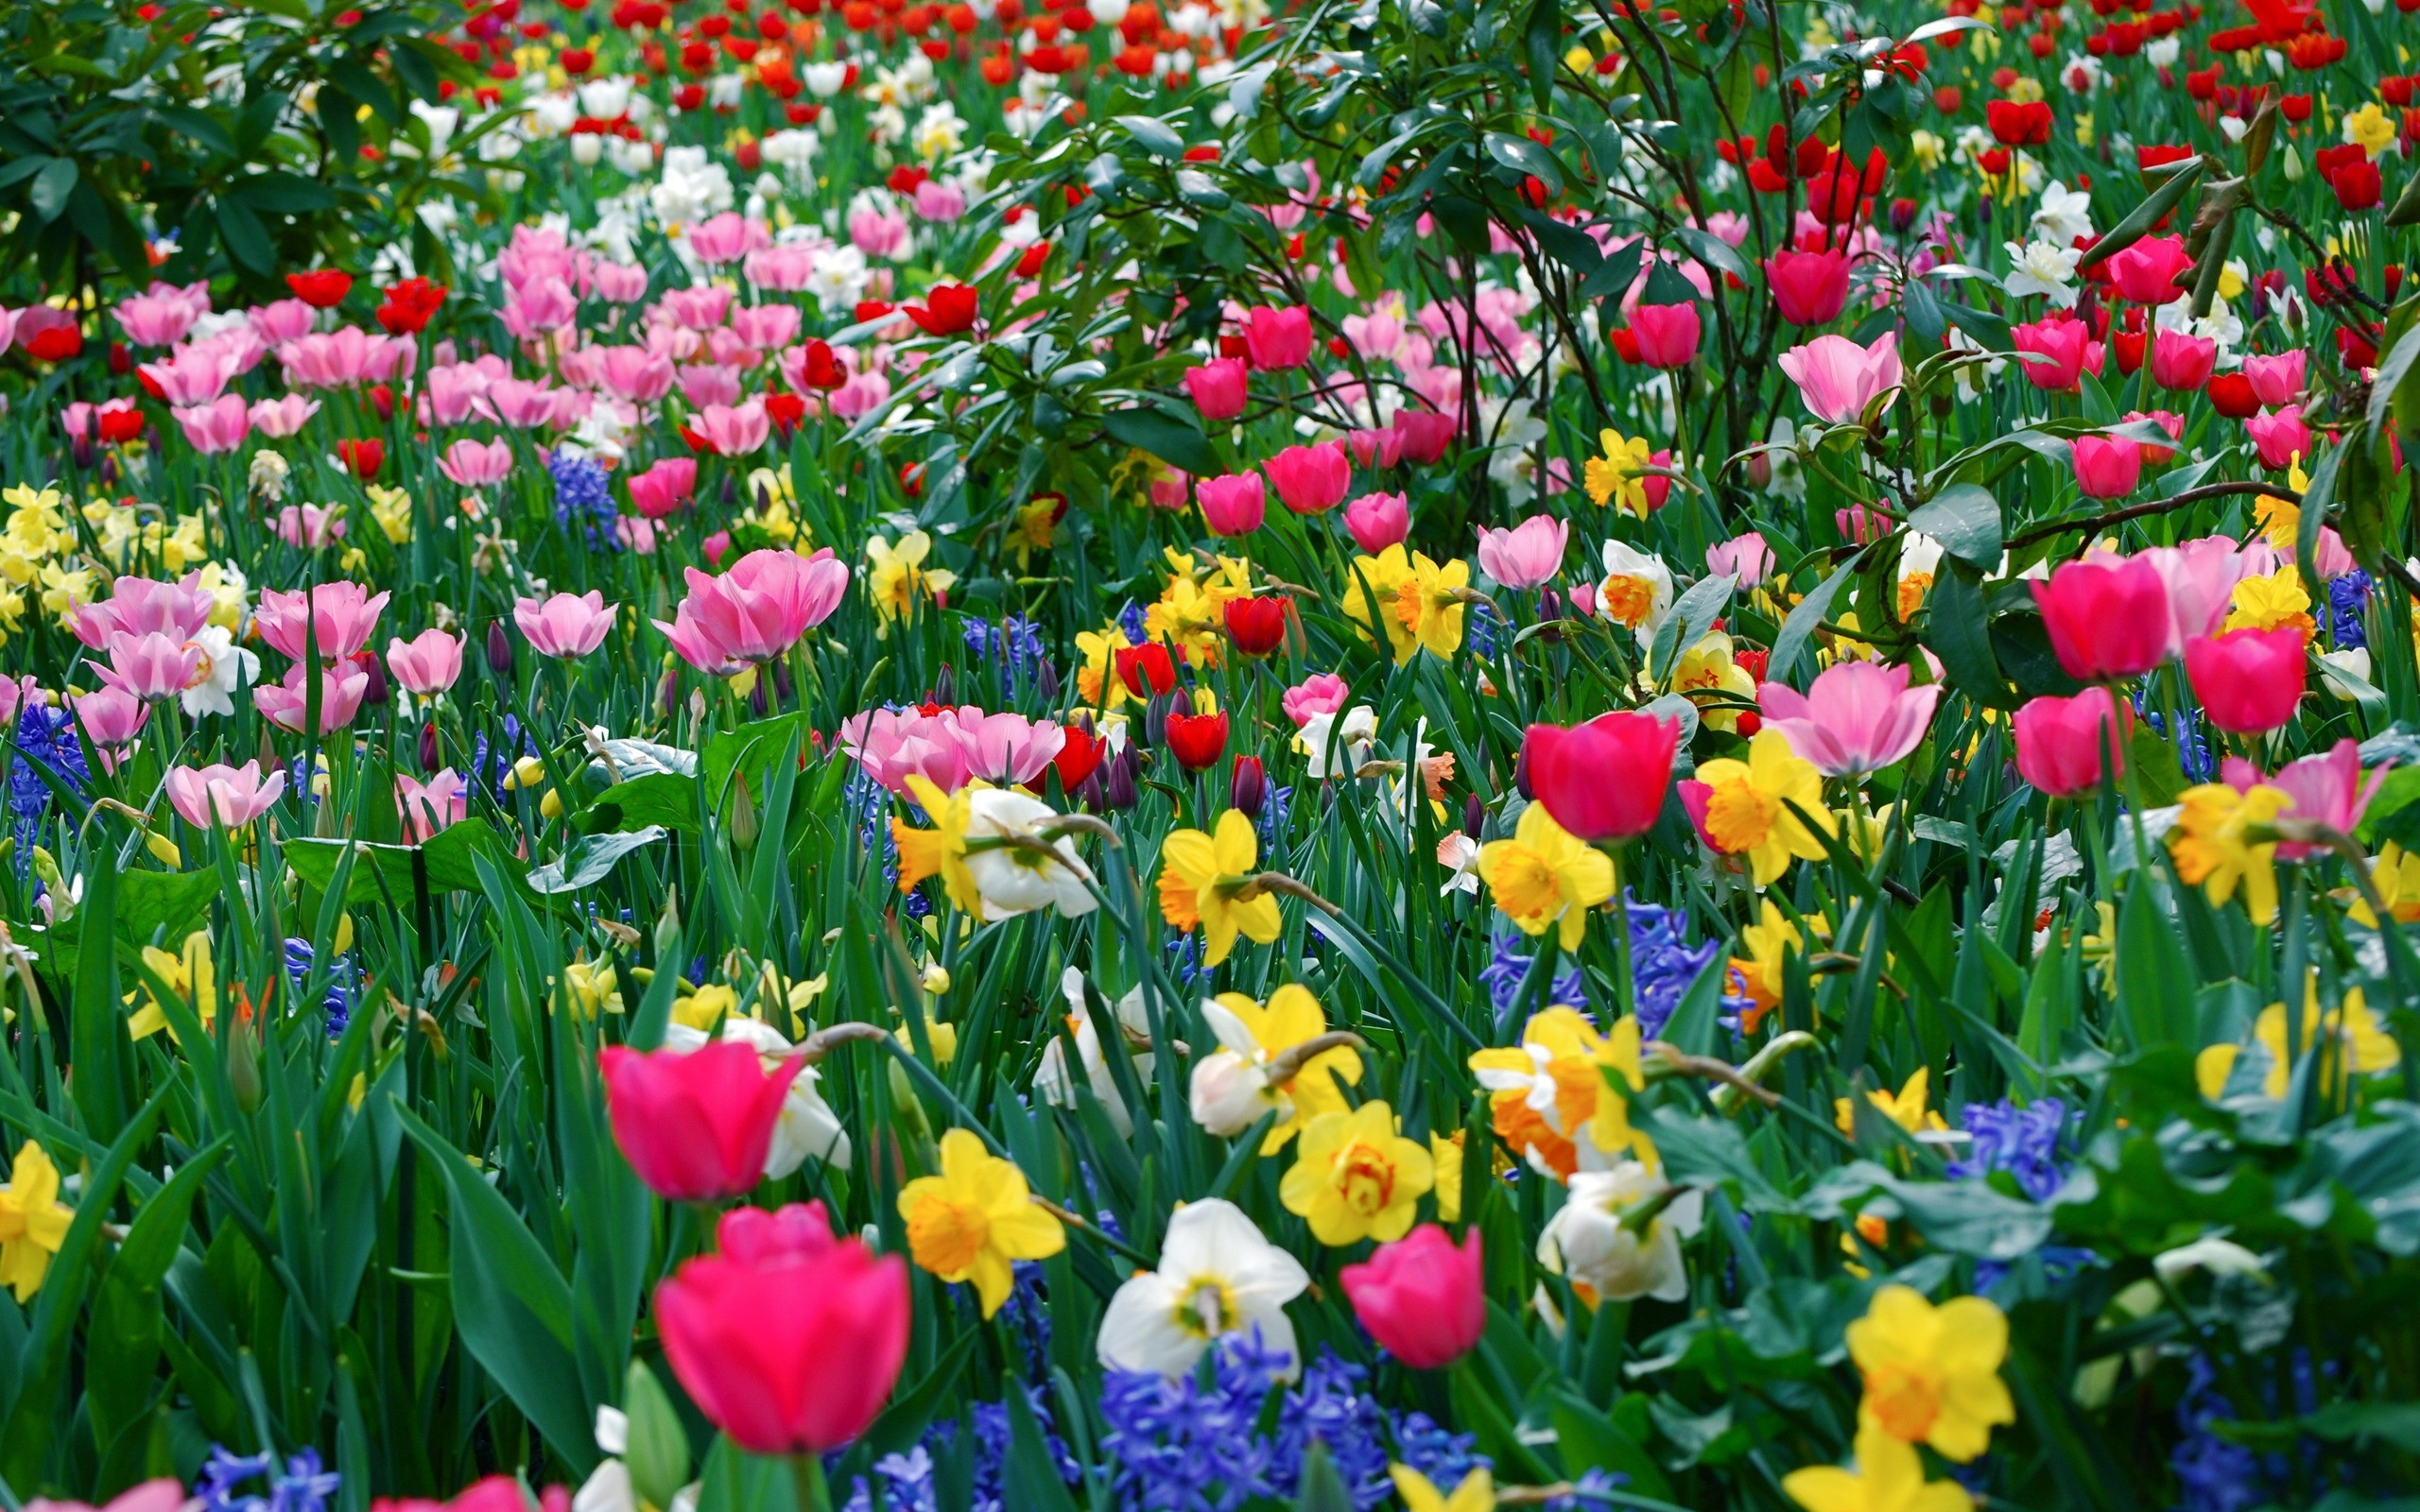 General 2560x1600 flowers garden tulips daffodils pink flowers spring plants colorful